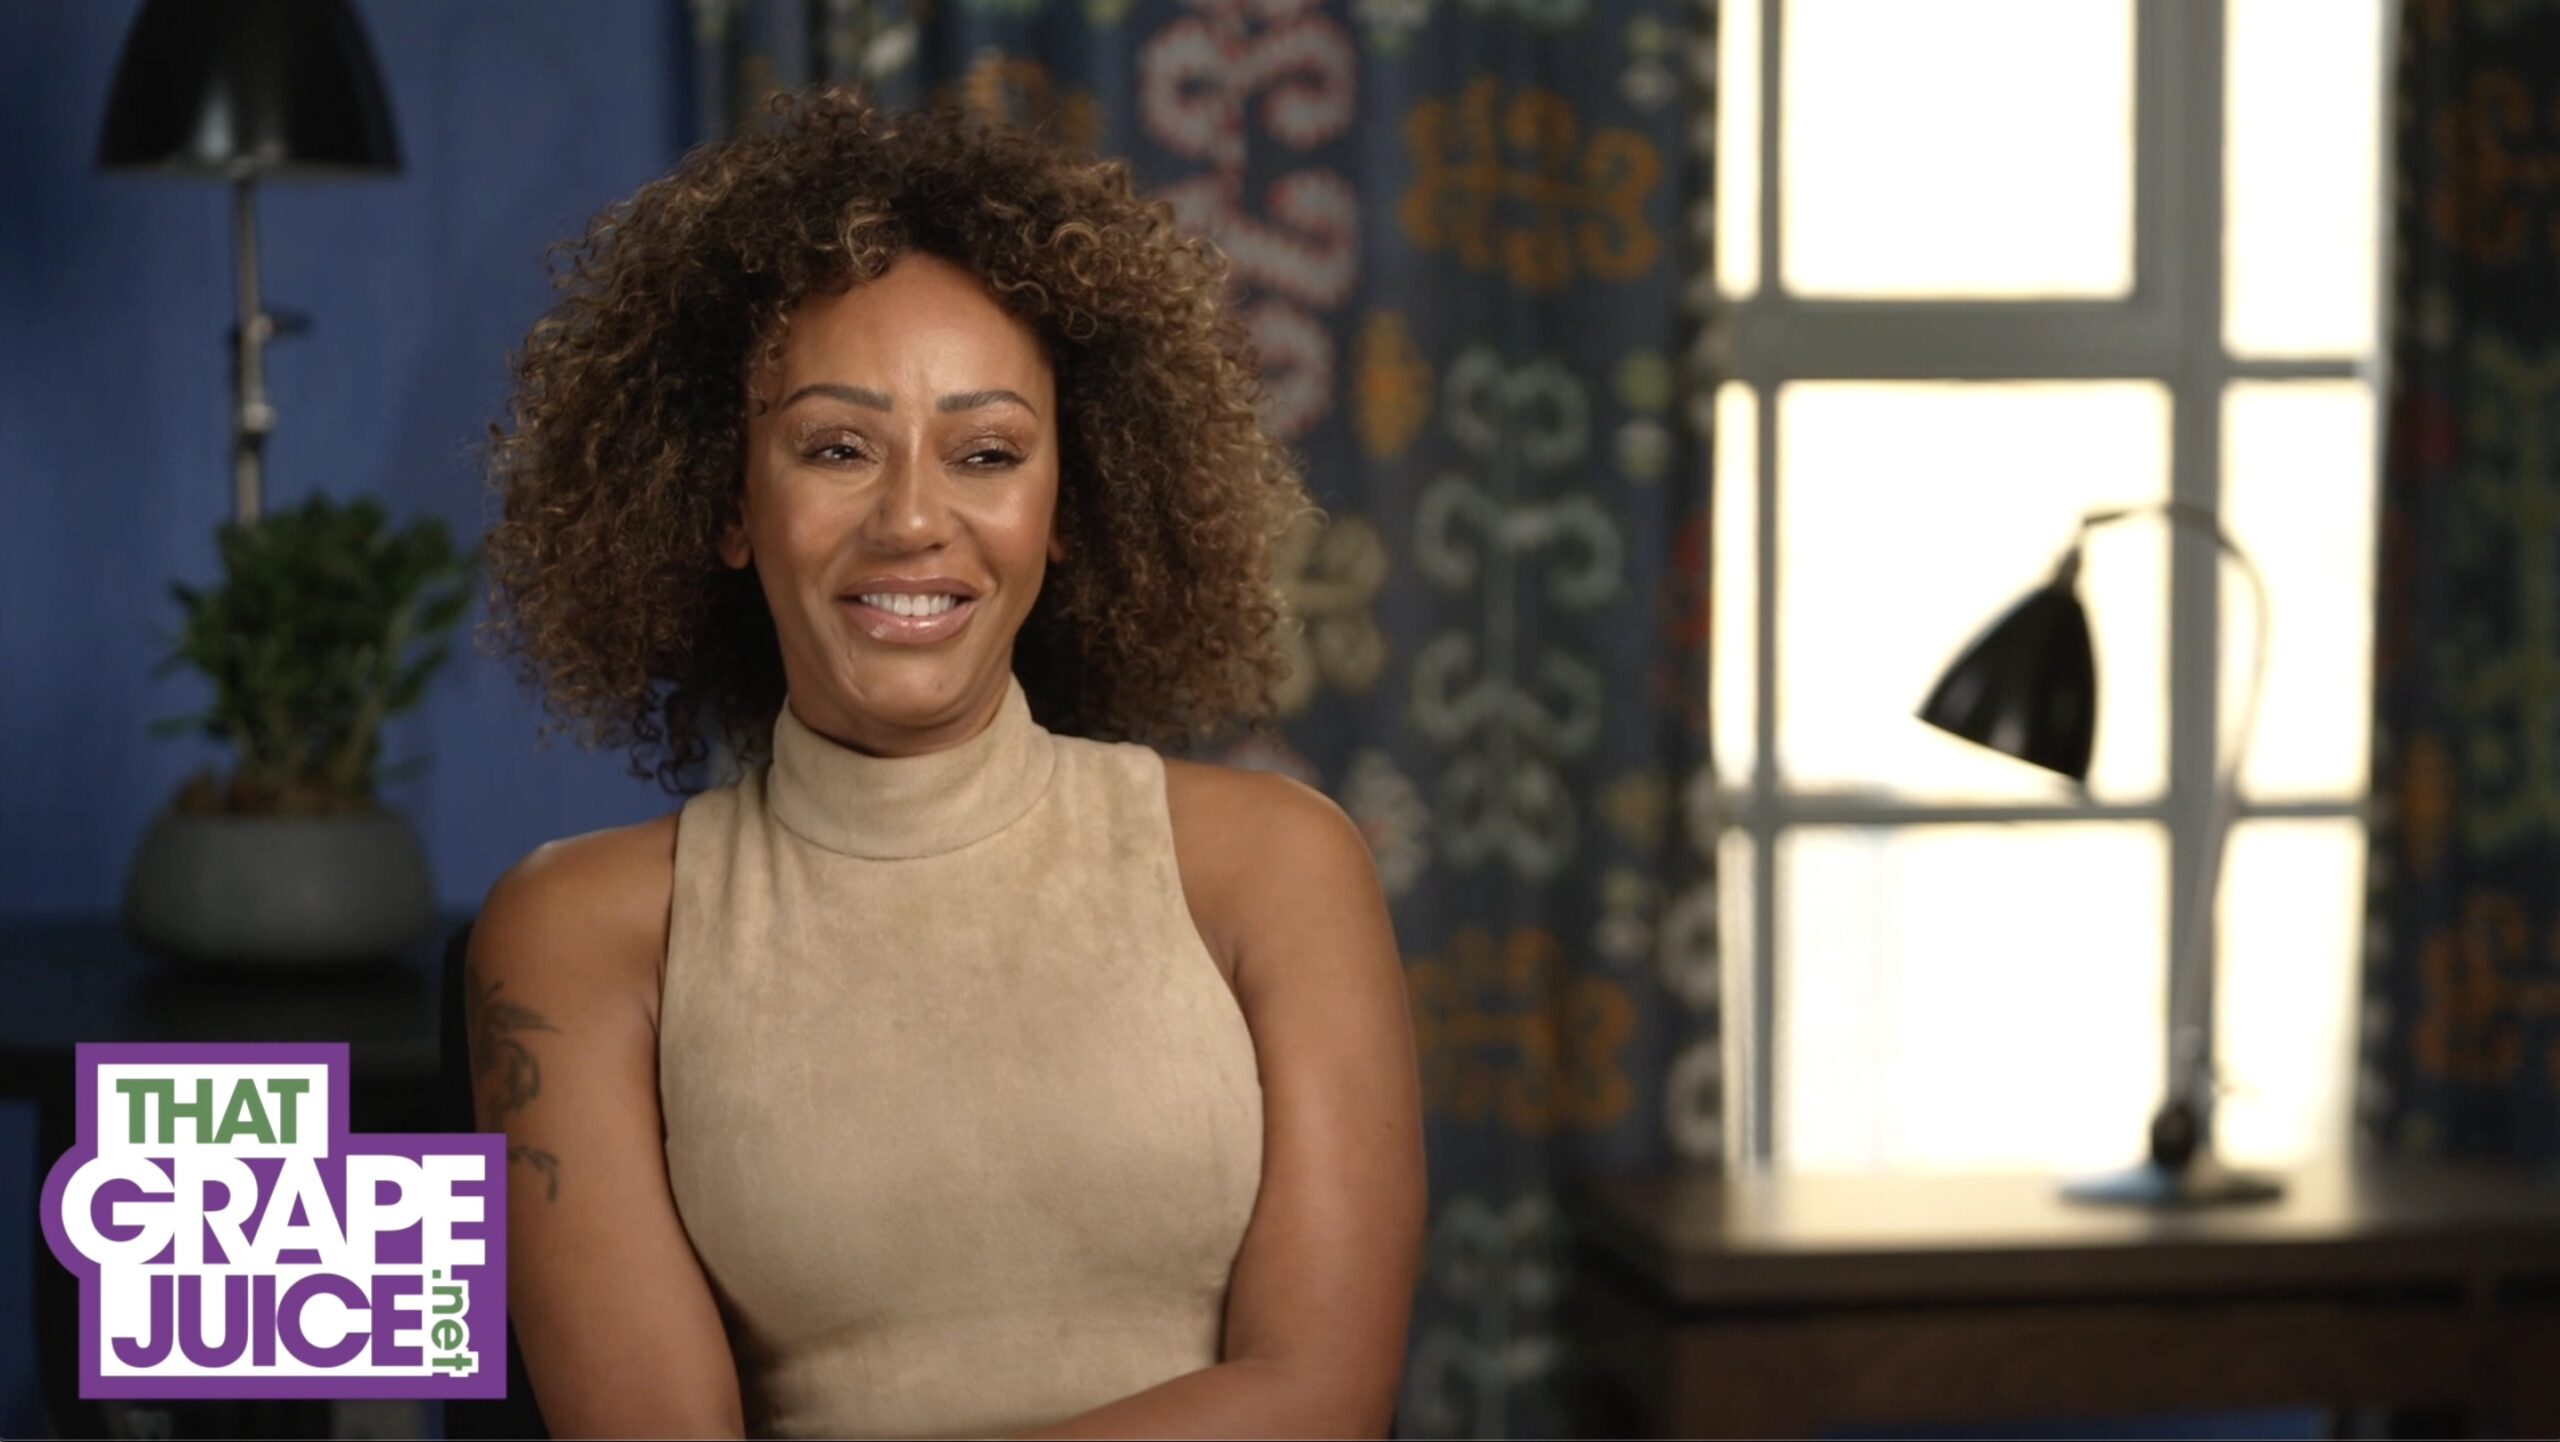 Exclusive: Mel B Dishes on Fiery Contestants on ‘Queen of the Universe’ Season 2